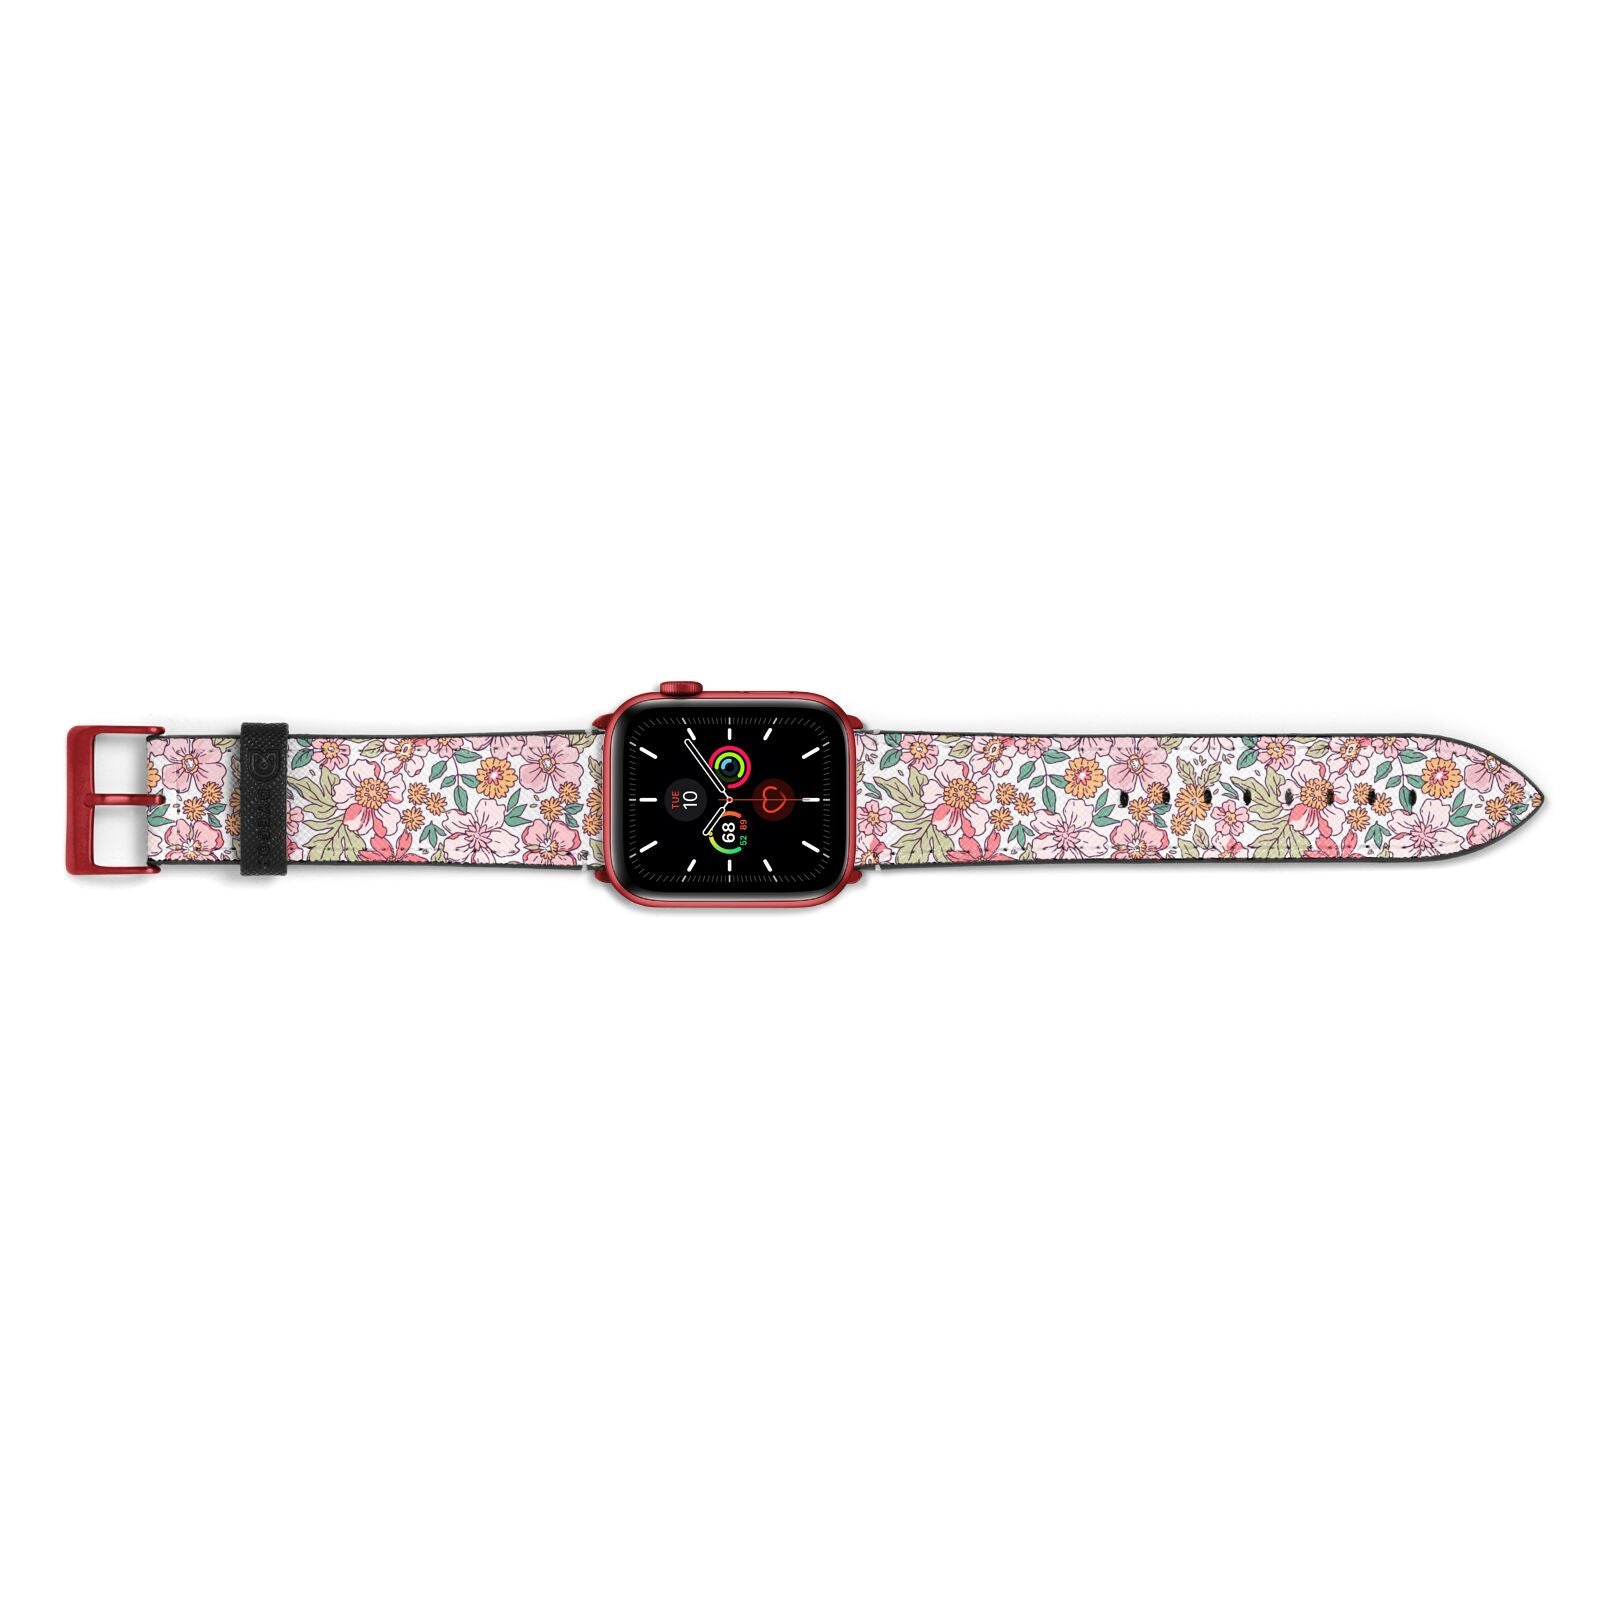 Small Floral Pattern Apple Watch Strap Landscape Image Red Hardware